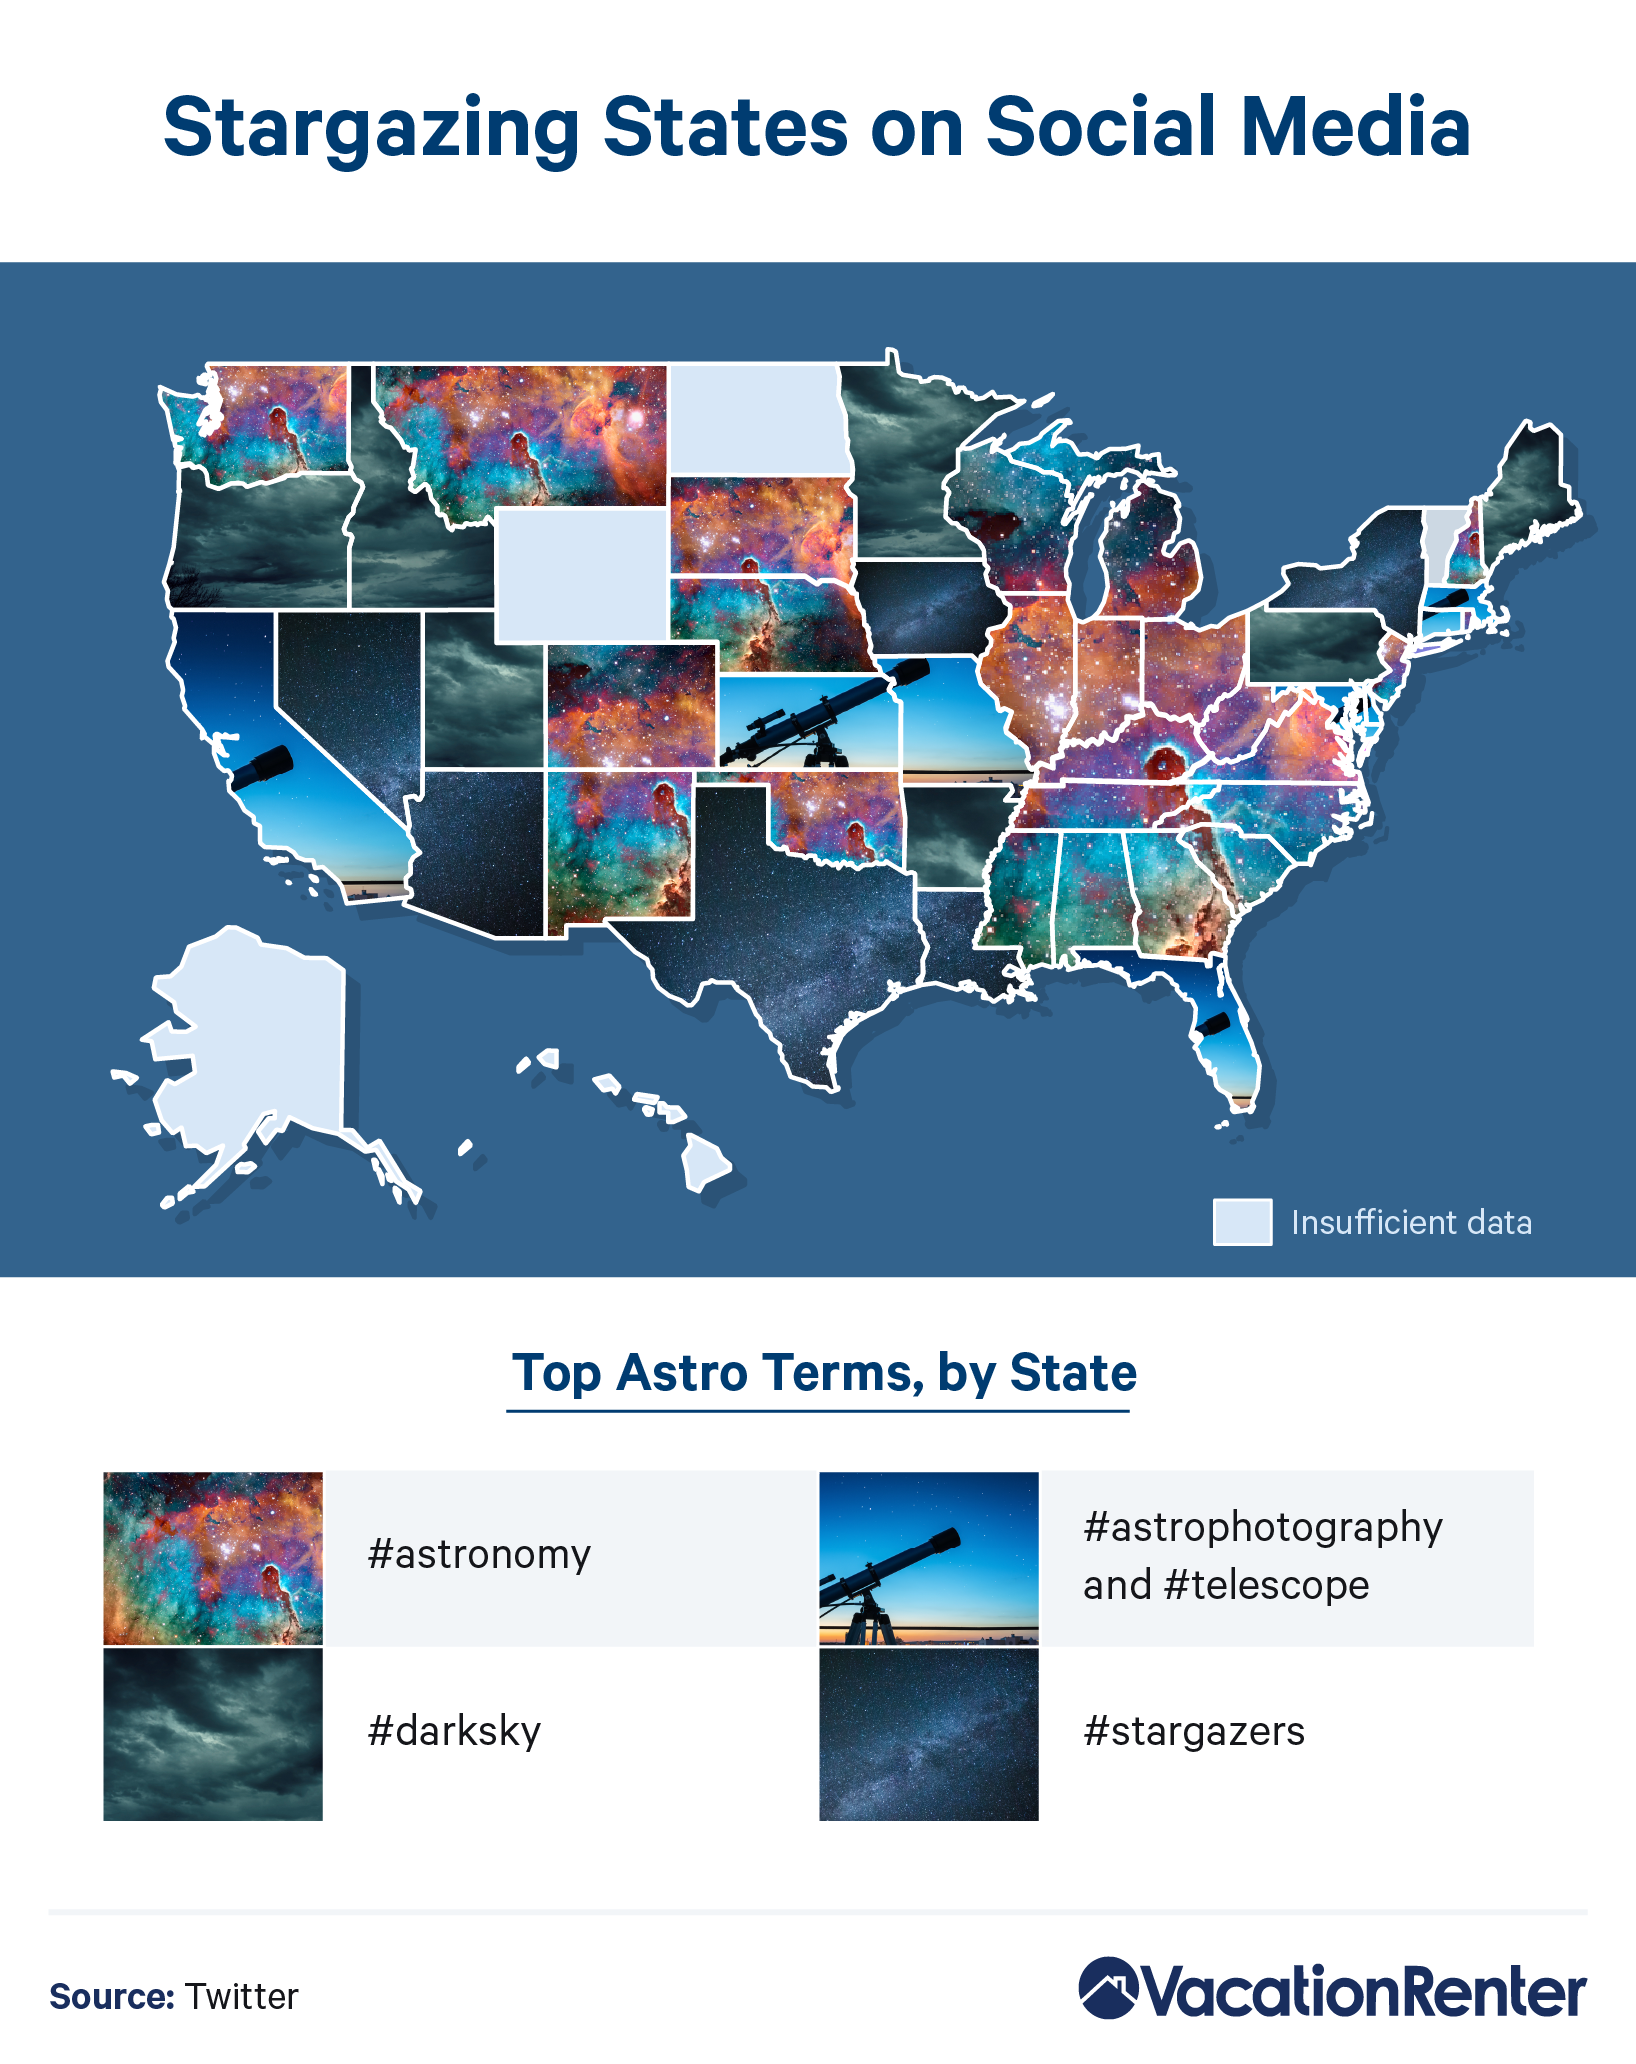 Top astro hashtags on Twitter by state.